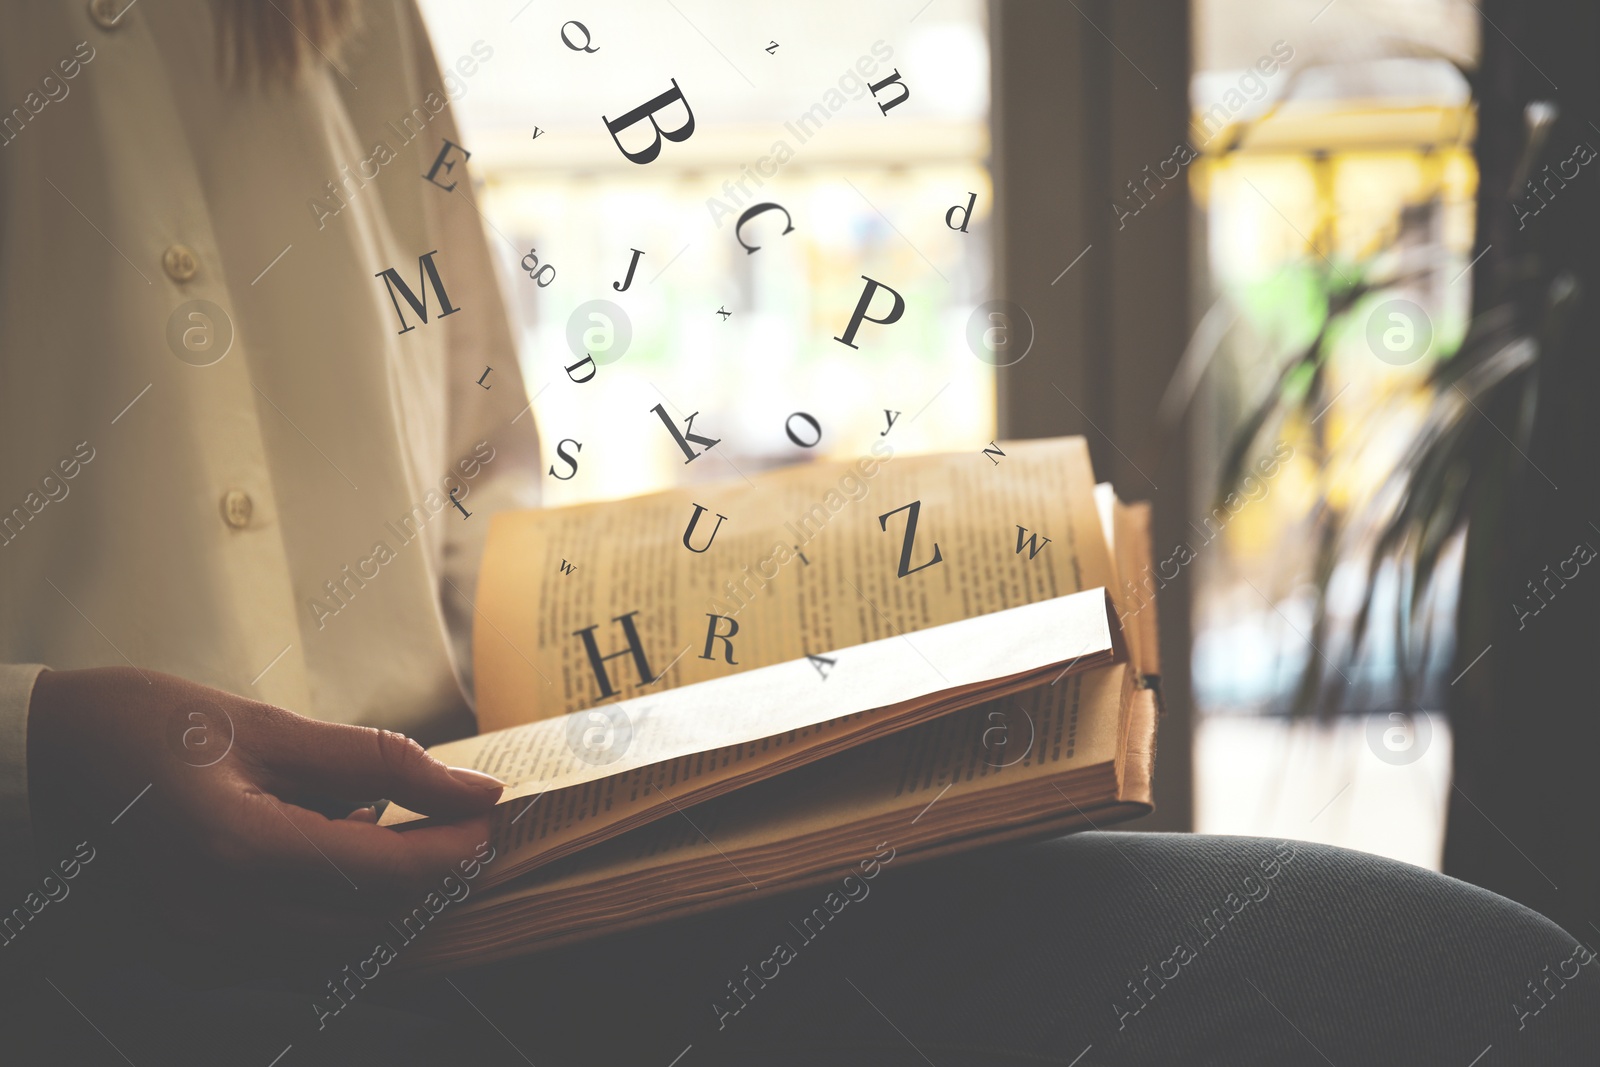 Image of Woman reading book with letters flying over it indoors, closeup